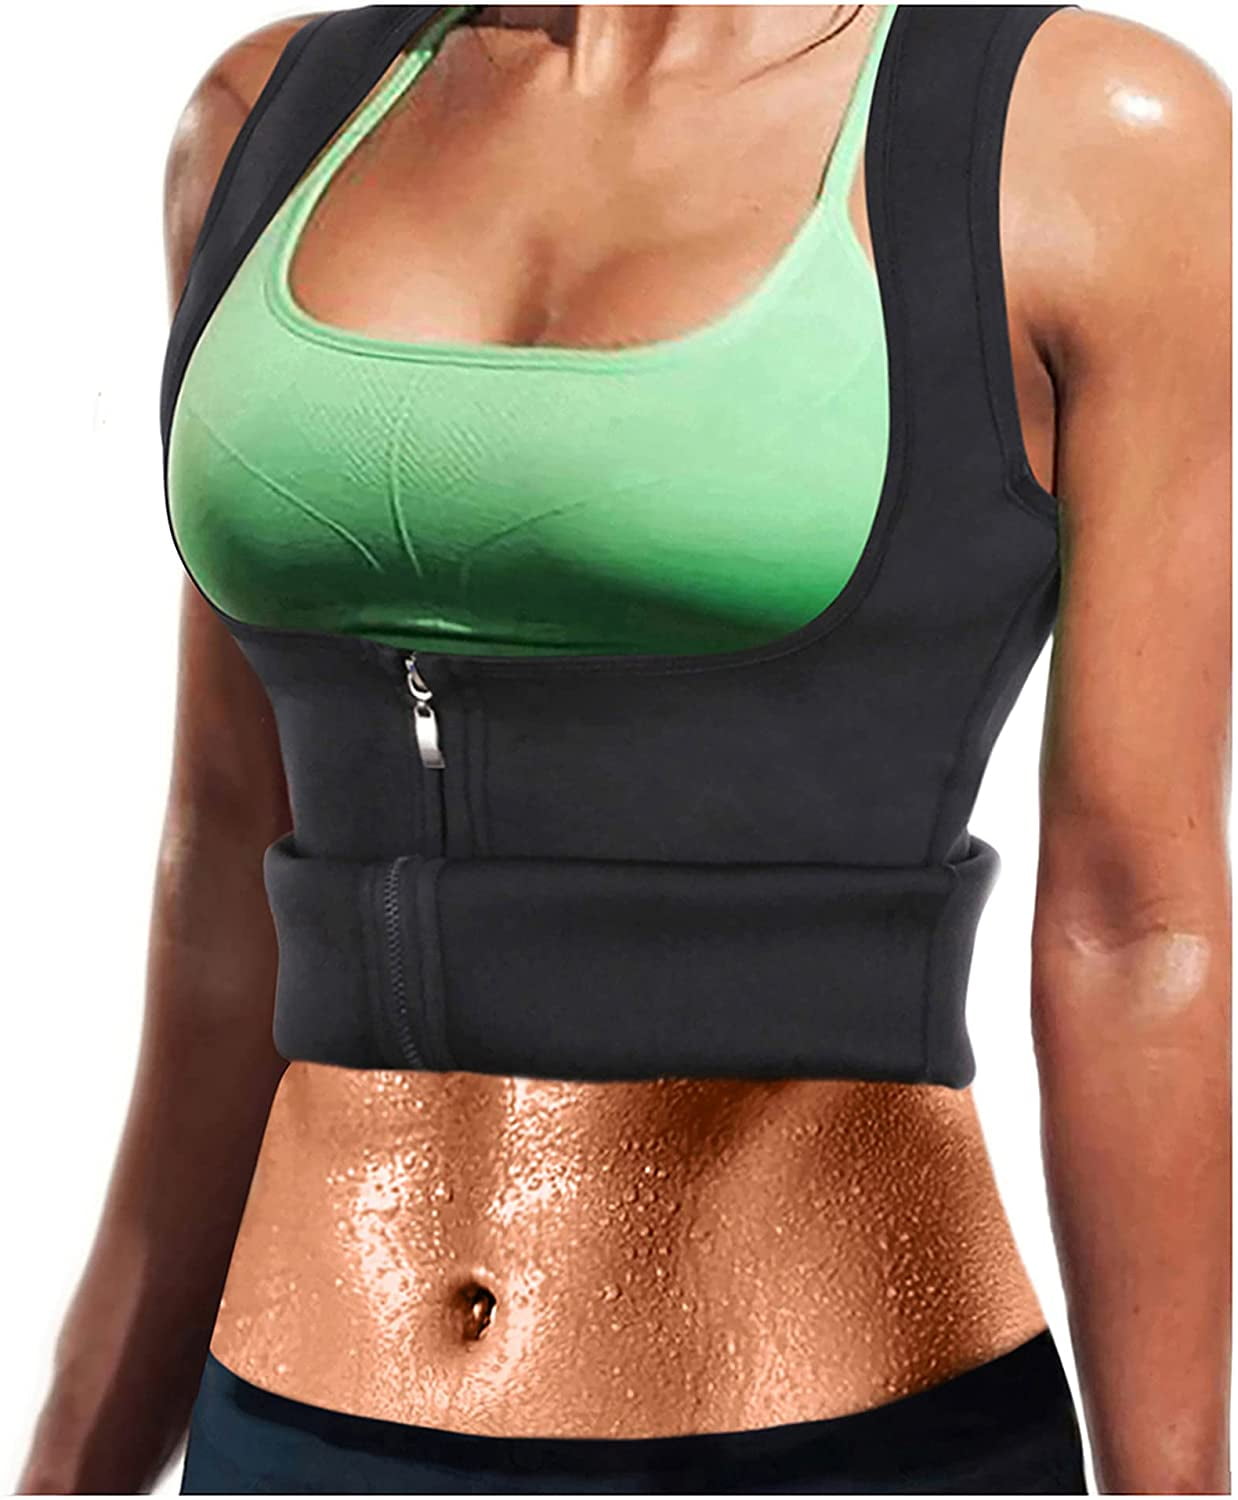 Neoprene Slimming Hot Vest With Sleeves Exercise Top Sauna Sweat For Weight Loss 